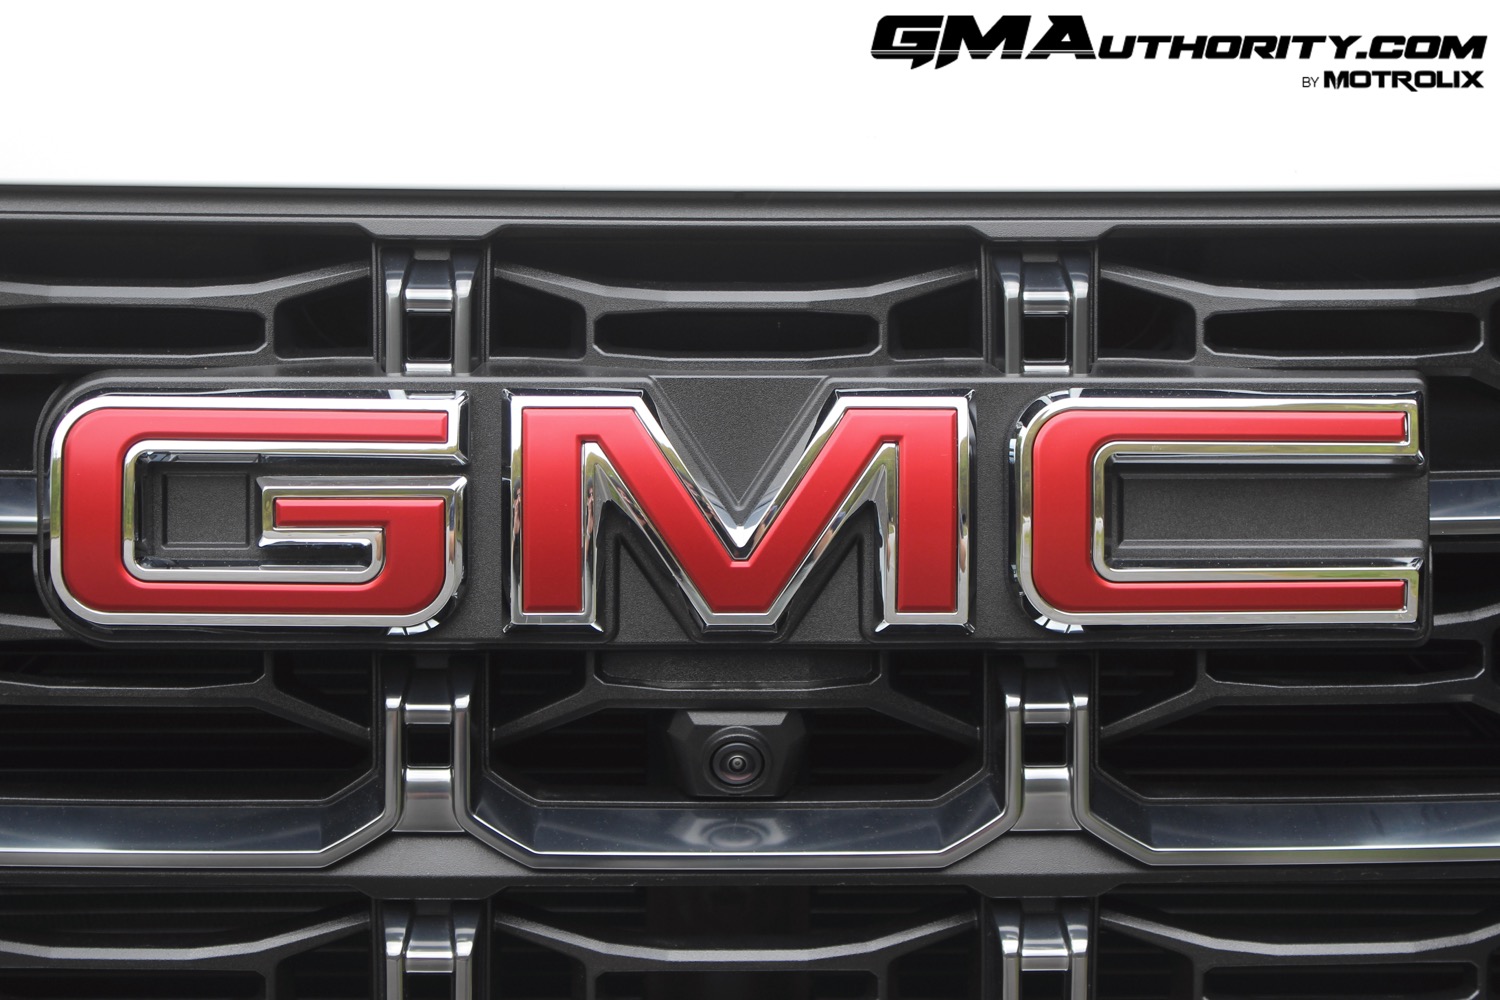 2023-gmc-canyon-at4-summit-white-gaz-first-drive-exterior-023-gmc-logo-badge-on-grille-front-camera